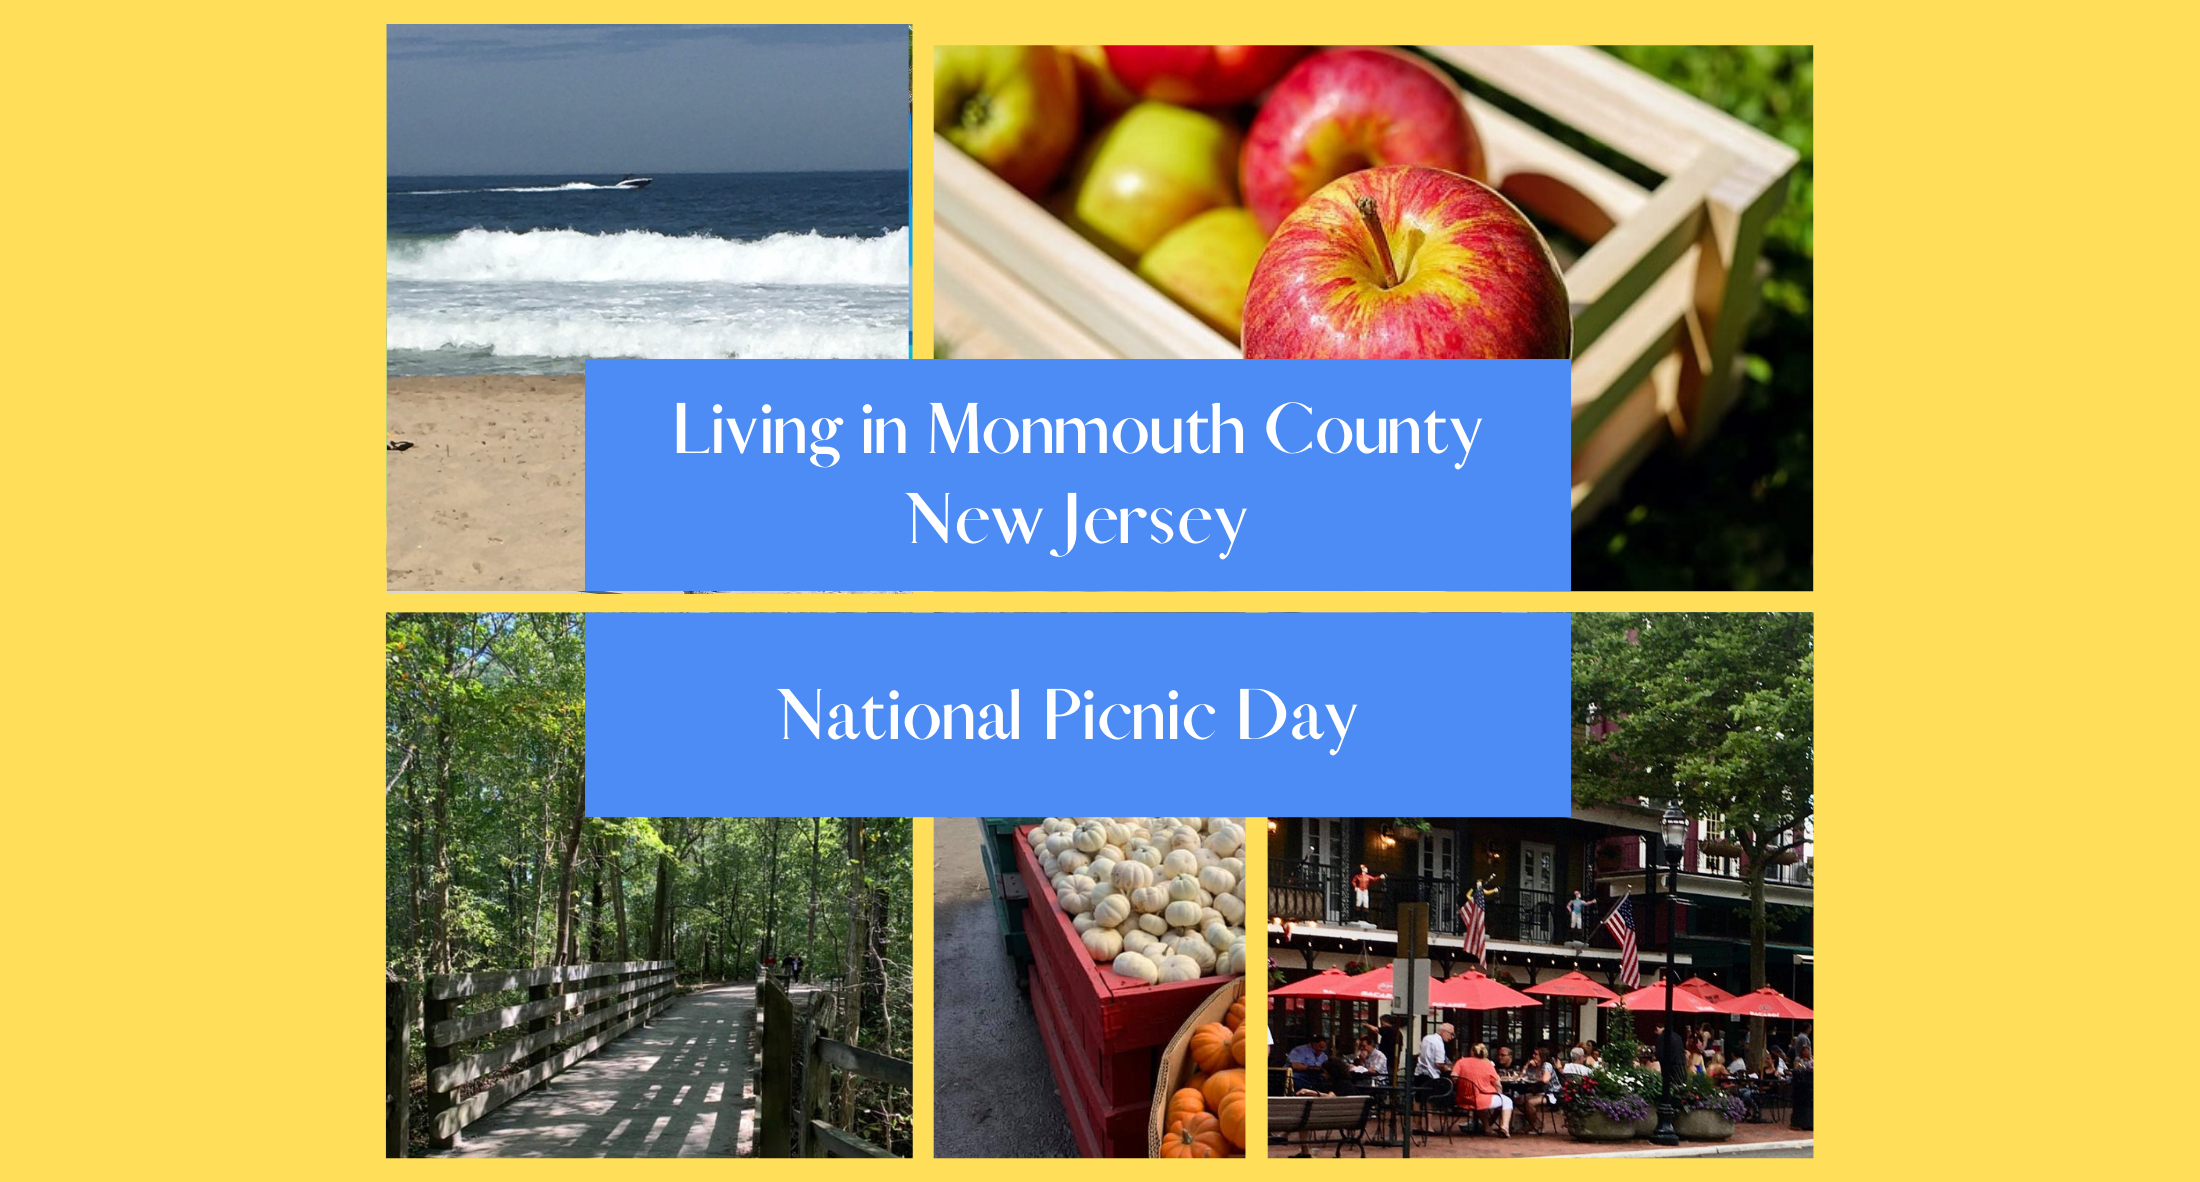 Picnic Day in Monmouth County